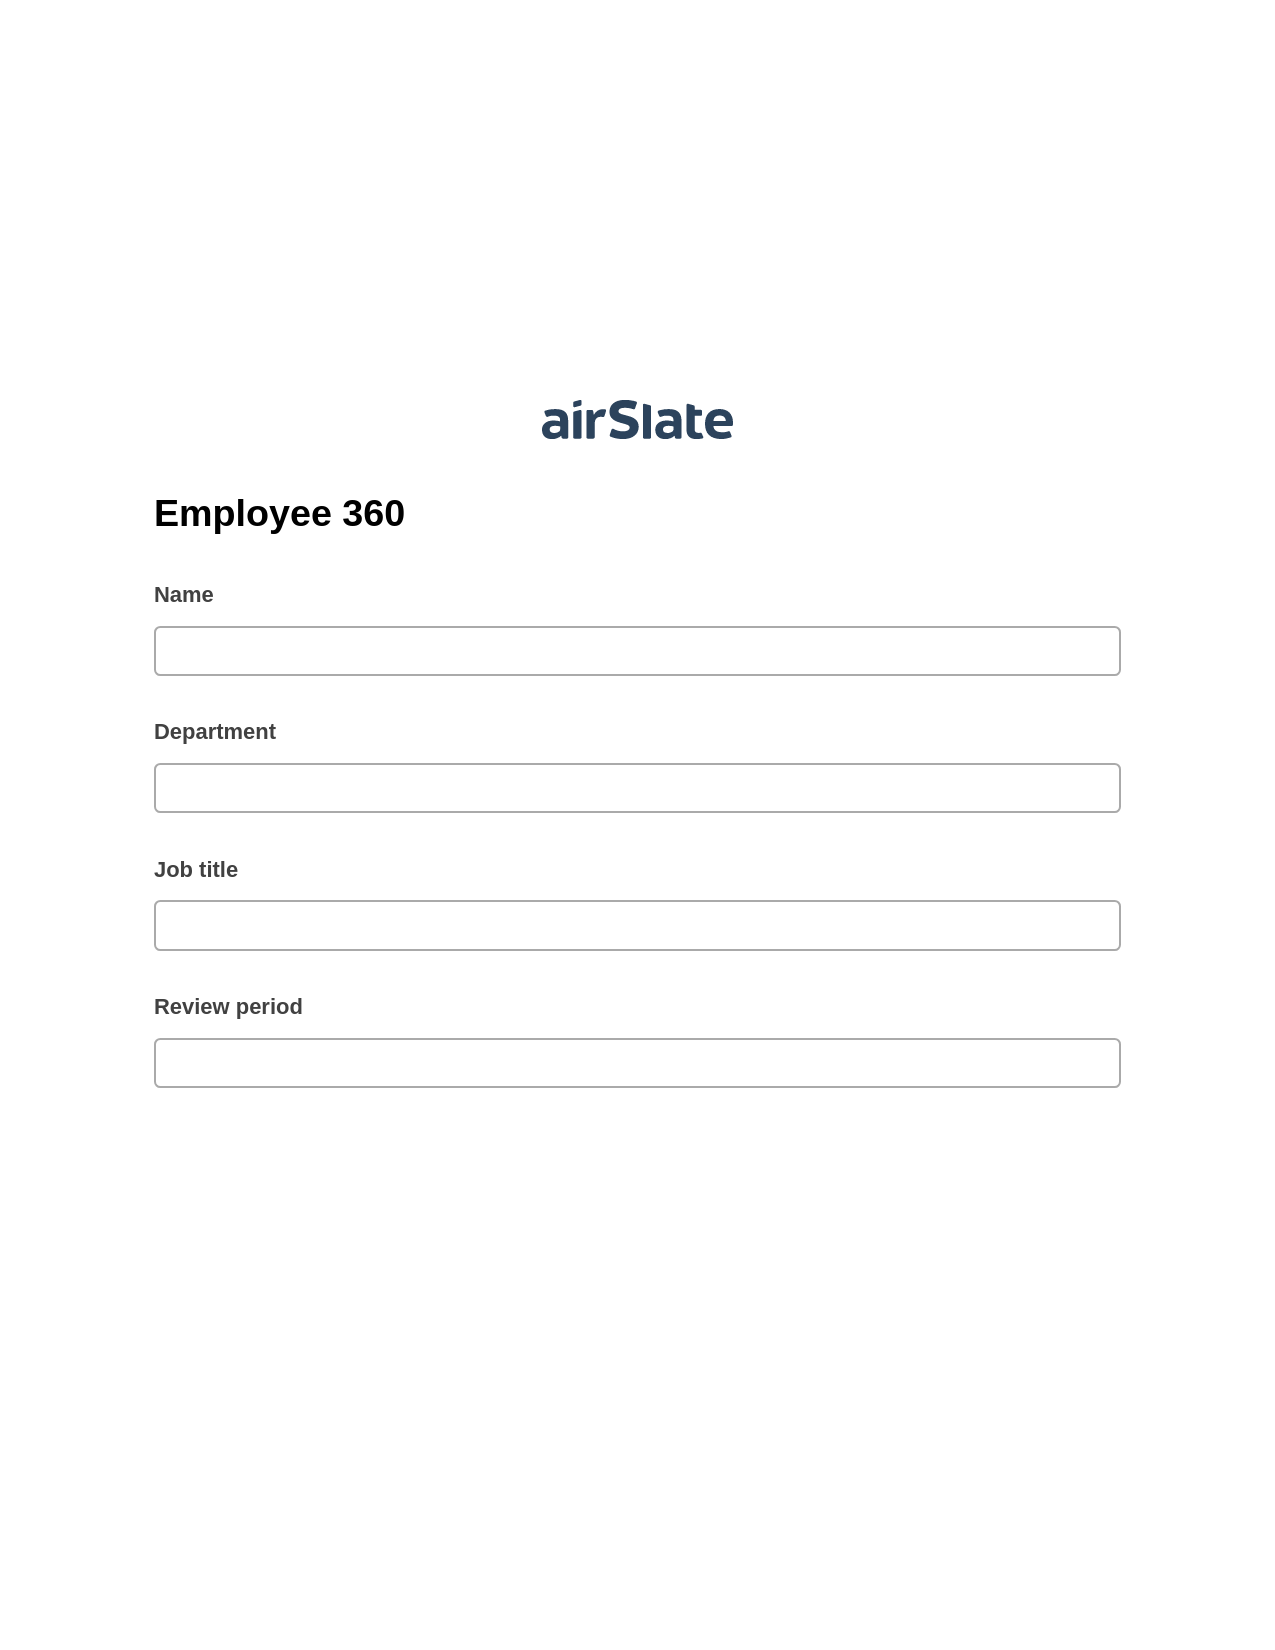 Employee 360 Pre-fill Dropdowns from Excel Bot, Invoke Salesforce Process Bot, Archive to Dropbox Bot